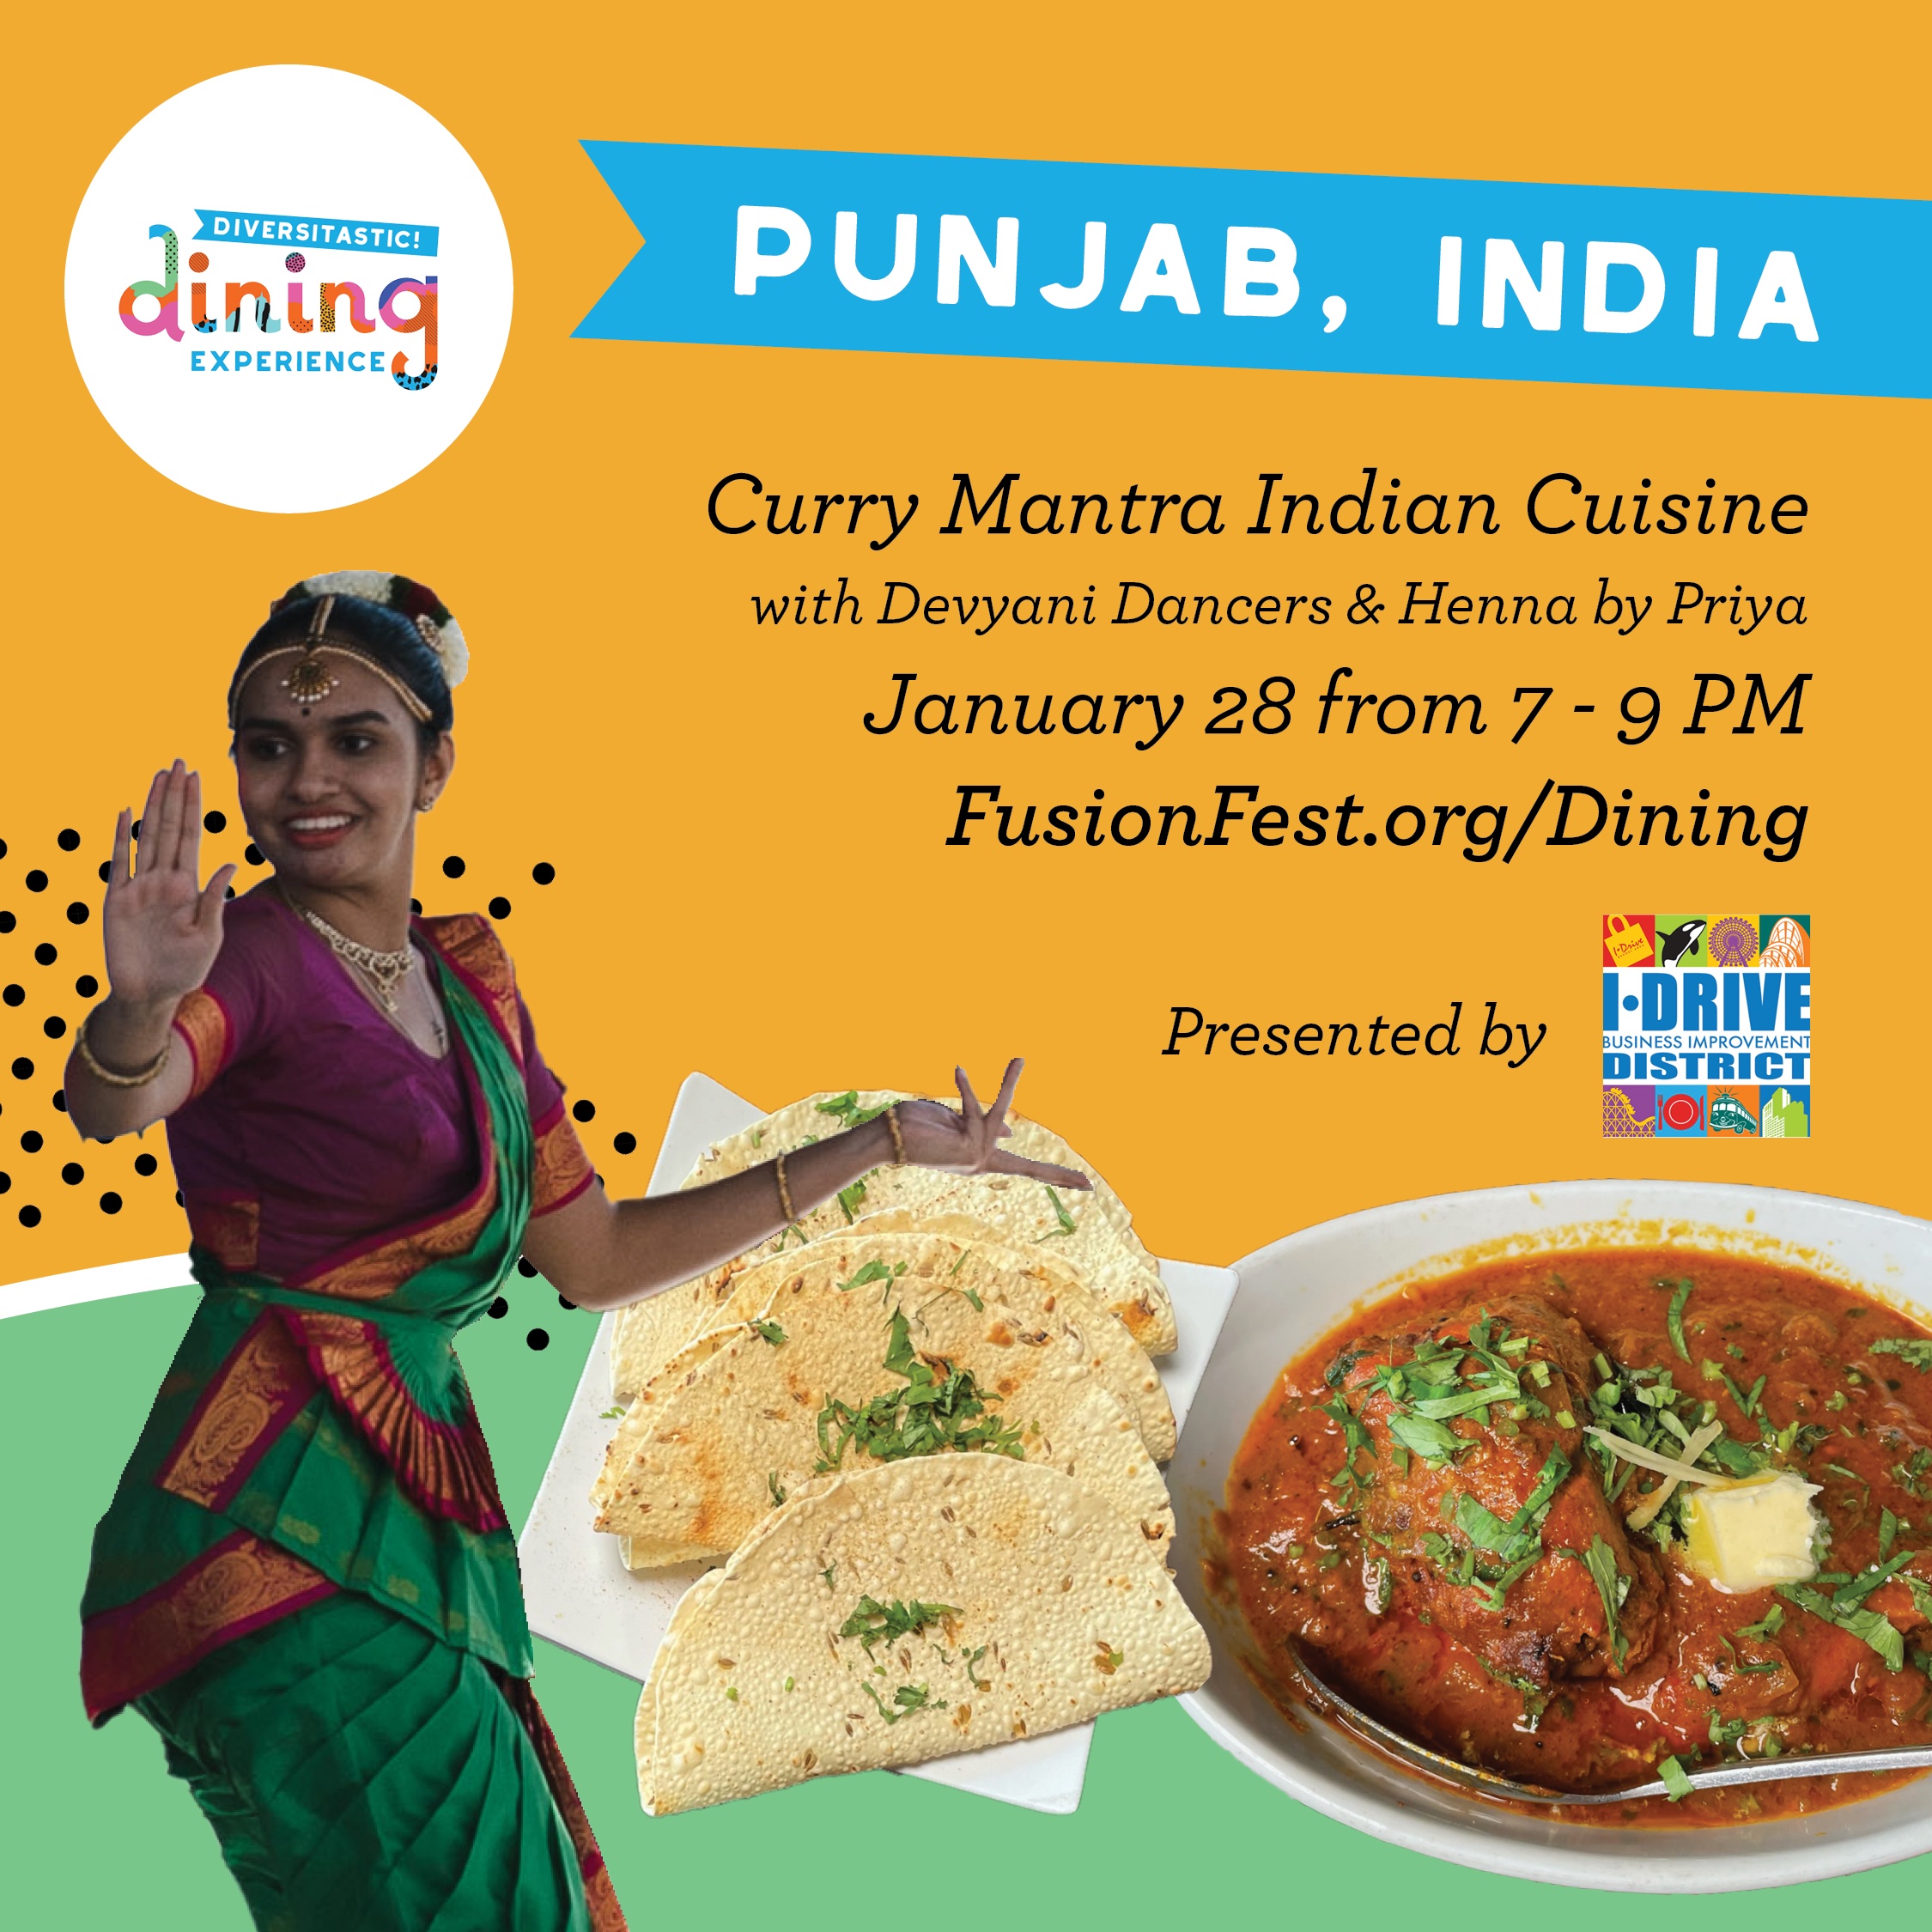 Diversitastic Dining Experience - Punjab, India - Curry Mantra Indian Cuisine with Devyani Dancers & Henna by Priya - January 28 from 7 to 9 PM - Presented by I-DRIVE District